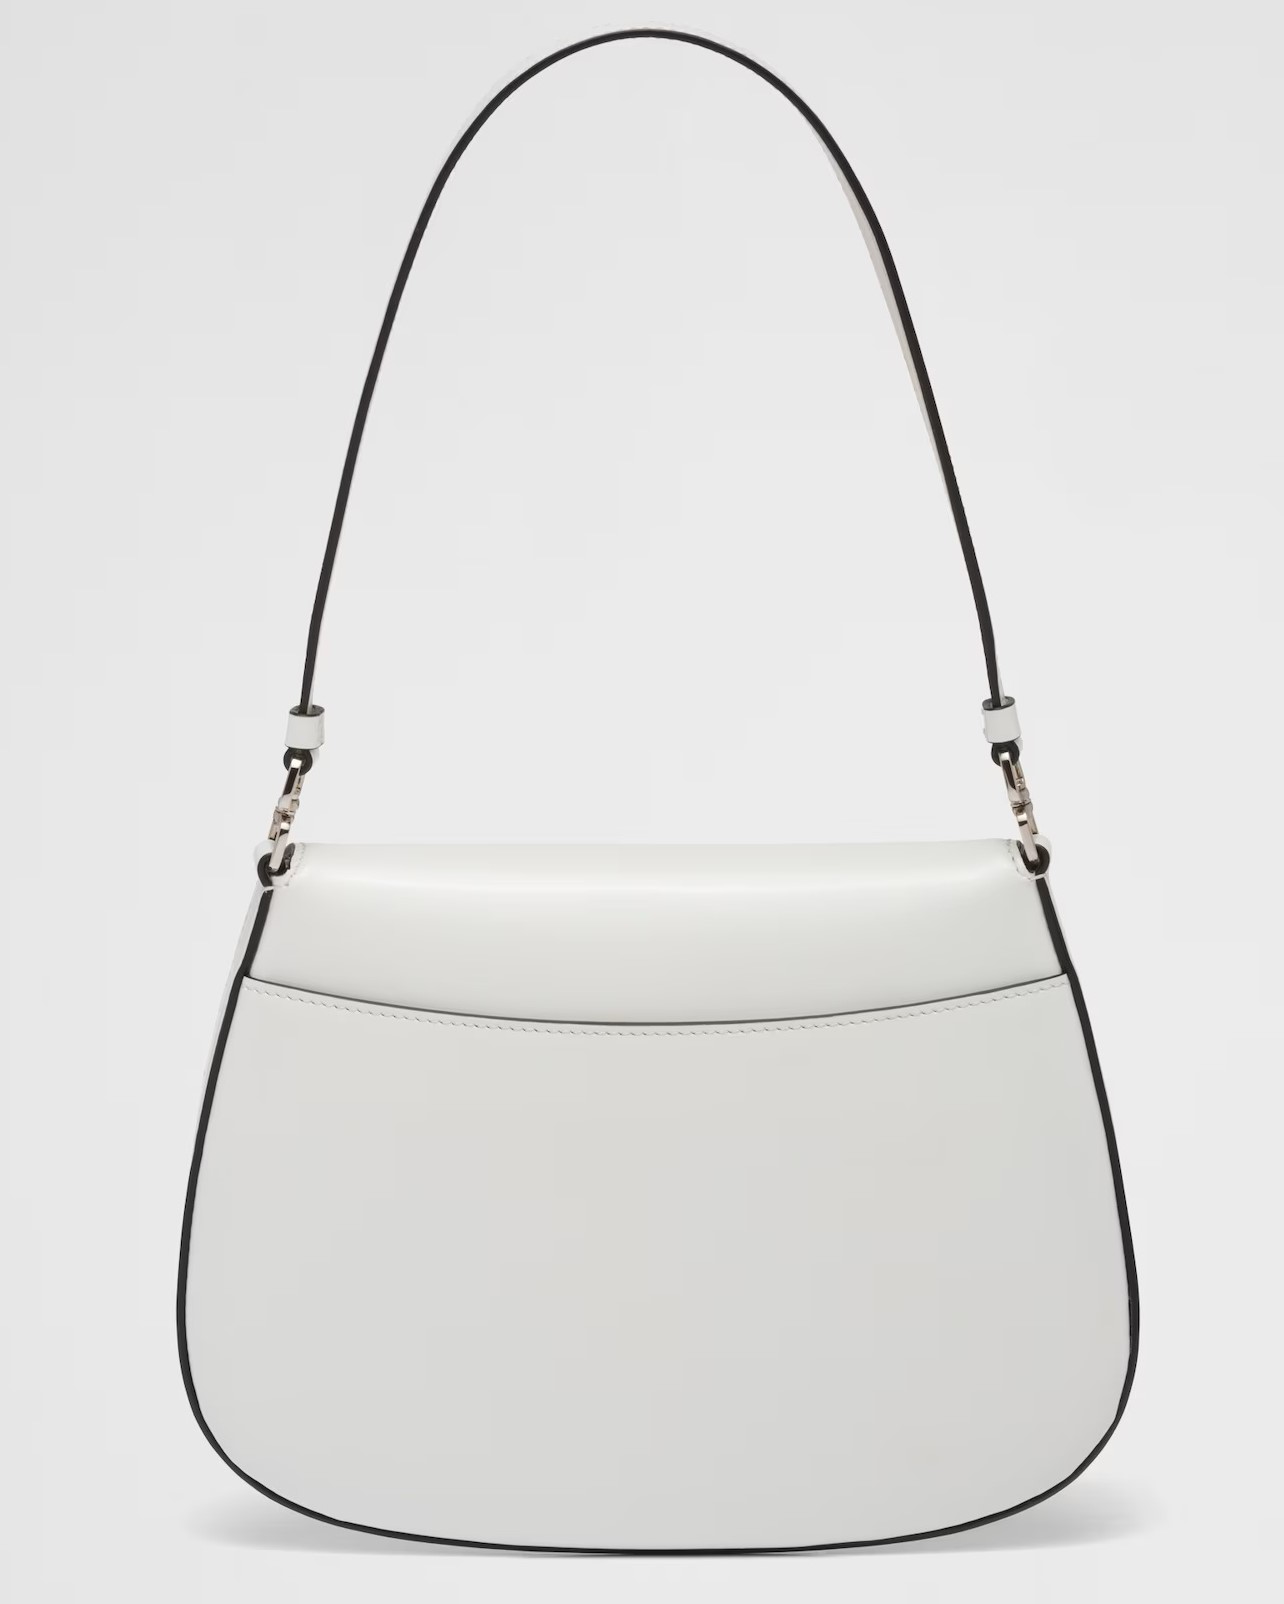 TÚI XÁCH PRADA CLEO BRUSHED LEATHER SHOULDER BAG WITH FLAP 19